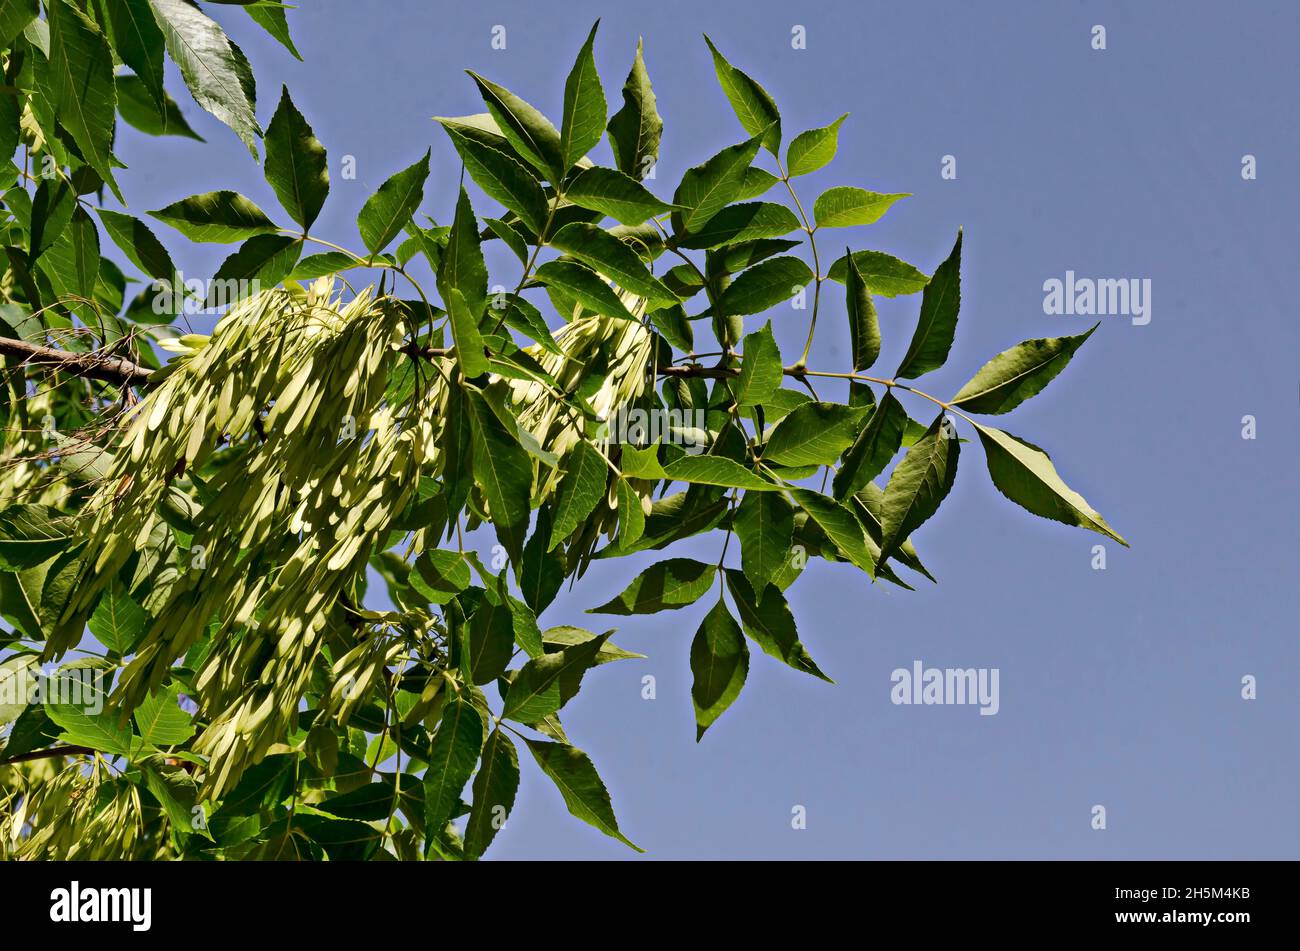 Branch of the ash tree or Fraxinus with immature seeds in summer, Sofia, Bulgaria Stock Photo